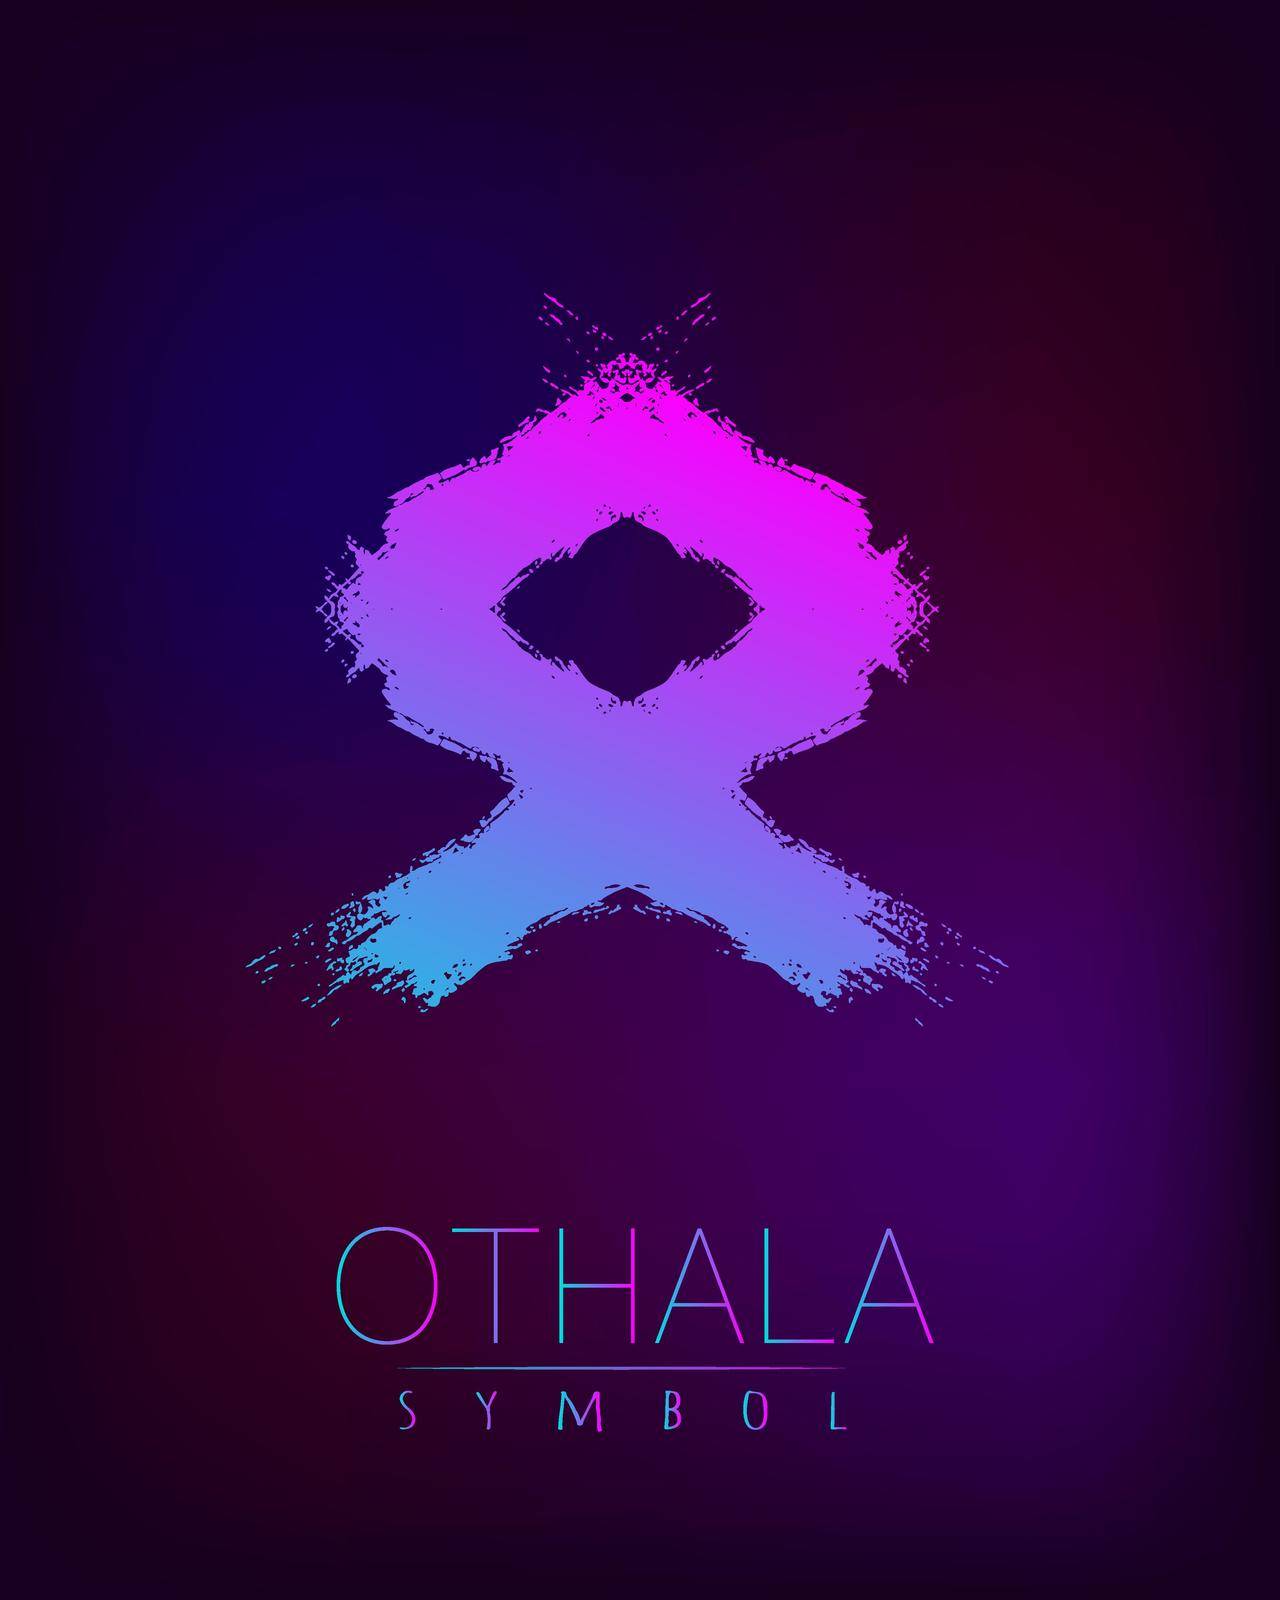 Rune Scandinavia is a Othala riches vector illustration. Symbol of Futhark letters. Brush stripes with trend gradient blue pink color on blur dark background. Magic and mystery sign. Spiritual by DesignAB